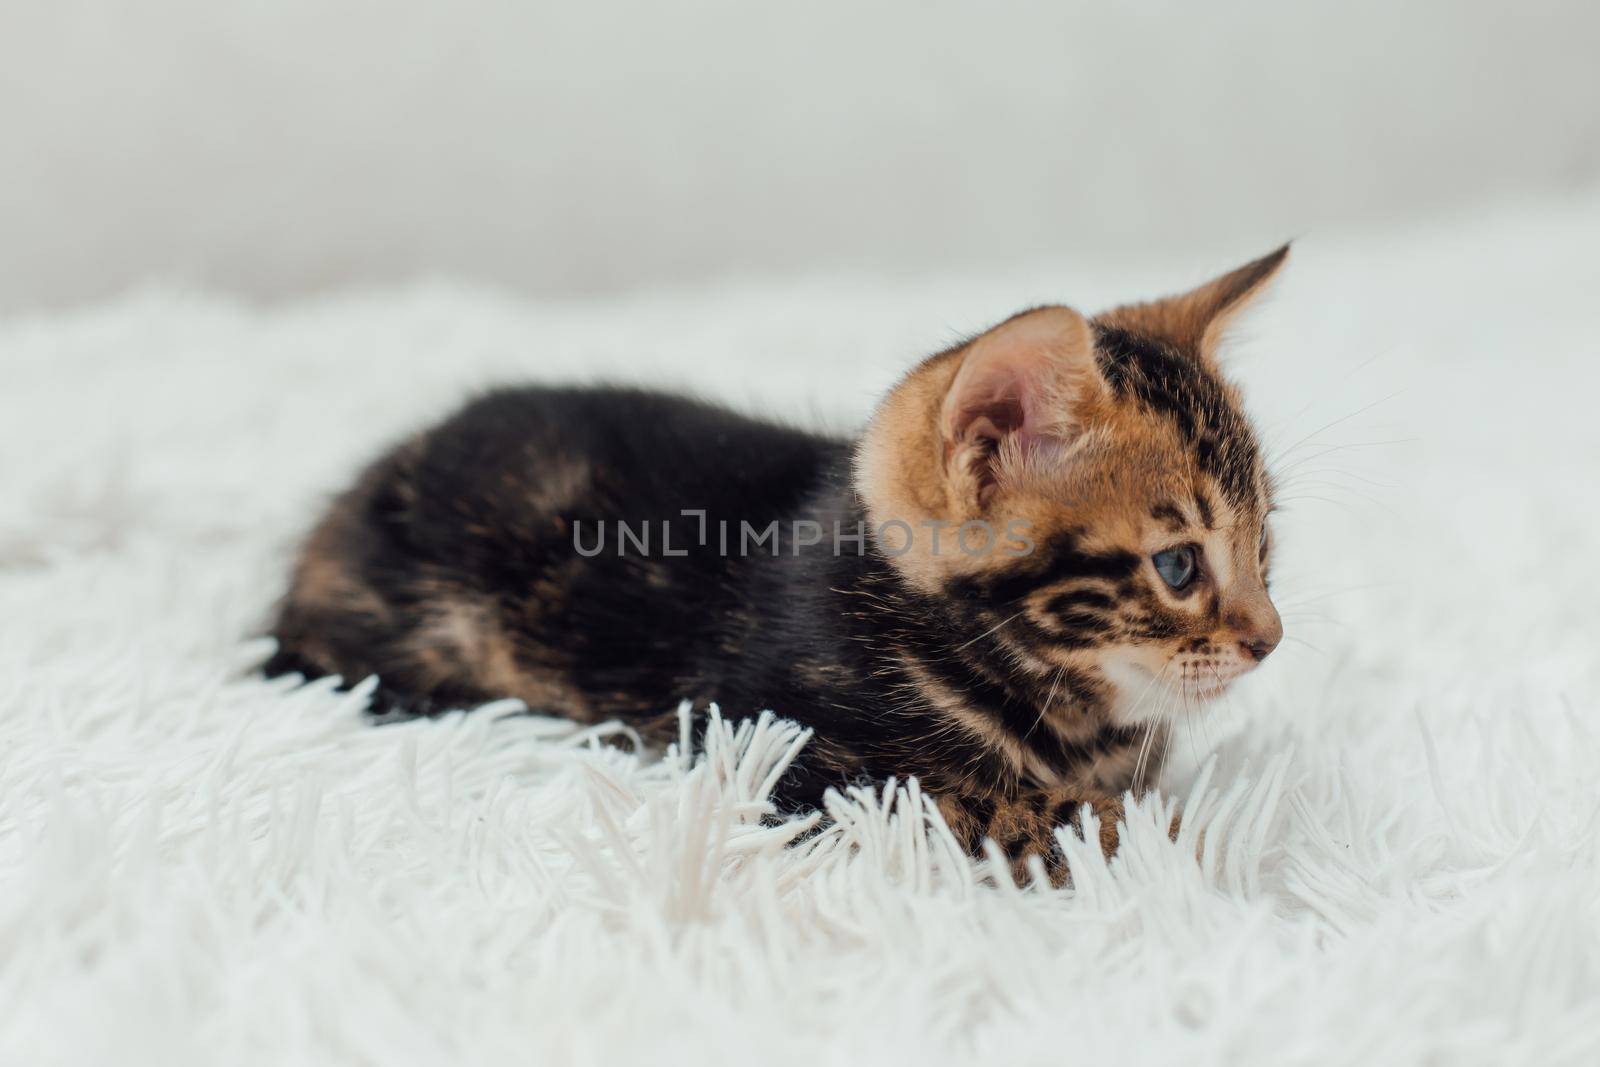 Cute marble bengal one month old kitten on the white fury blanket close-up.